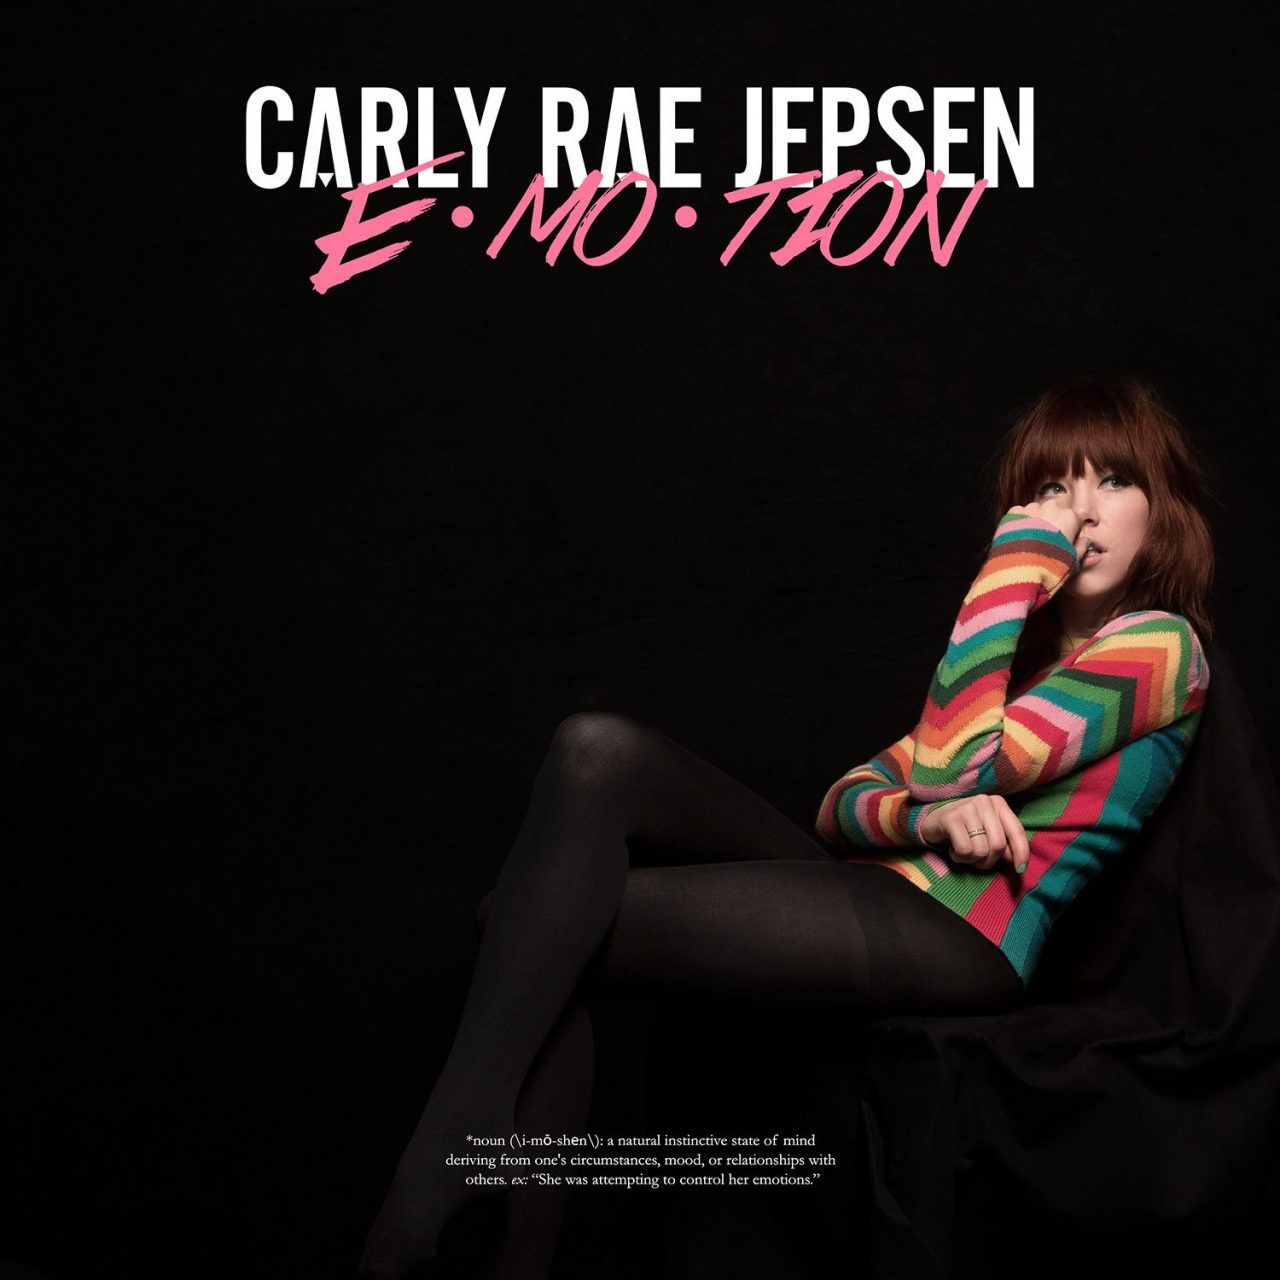 71Siv1oLDL. SL1500  - Dreams of Getaway Love – Diving into Carly Rae Jepsen’s E•MO•TION